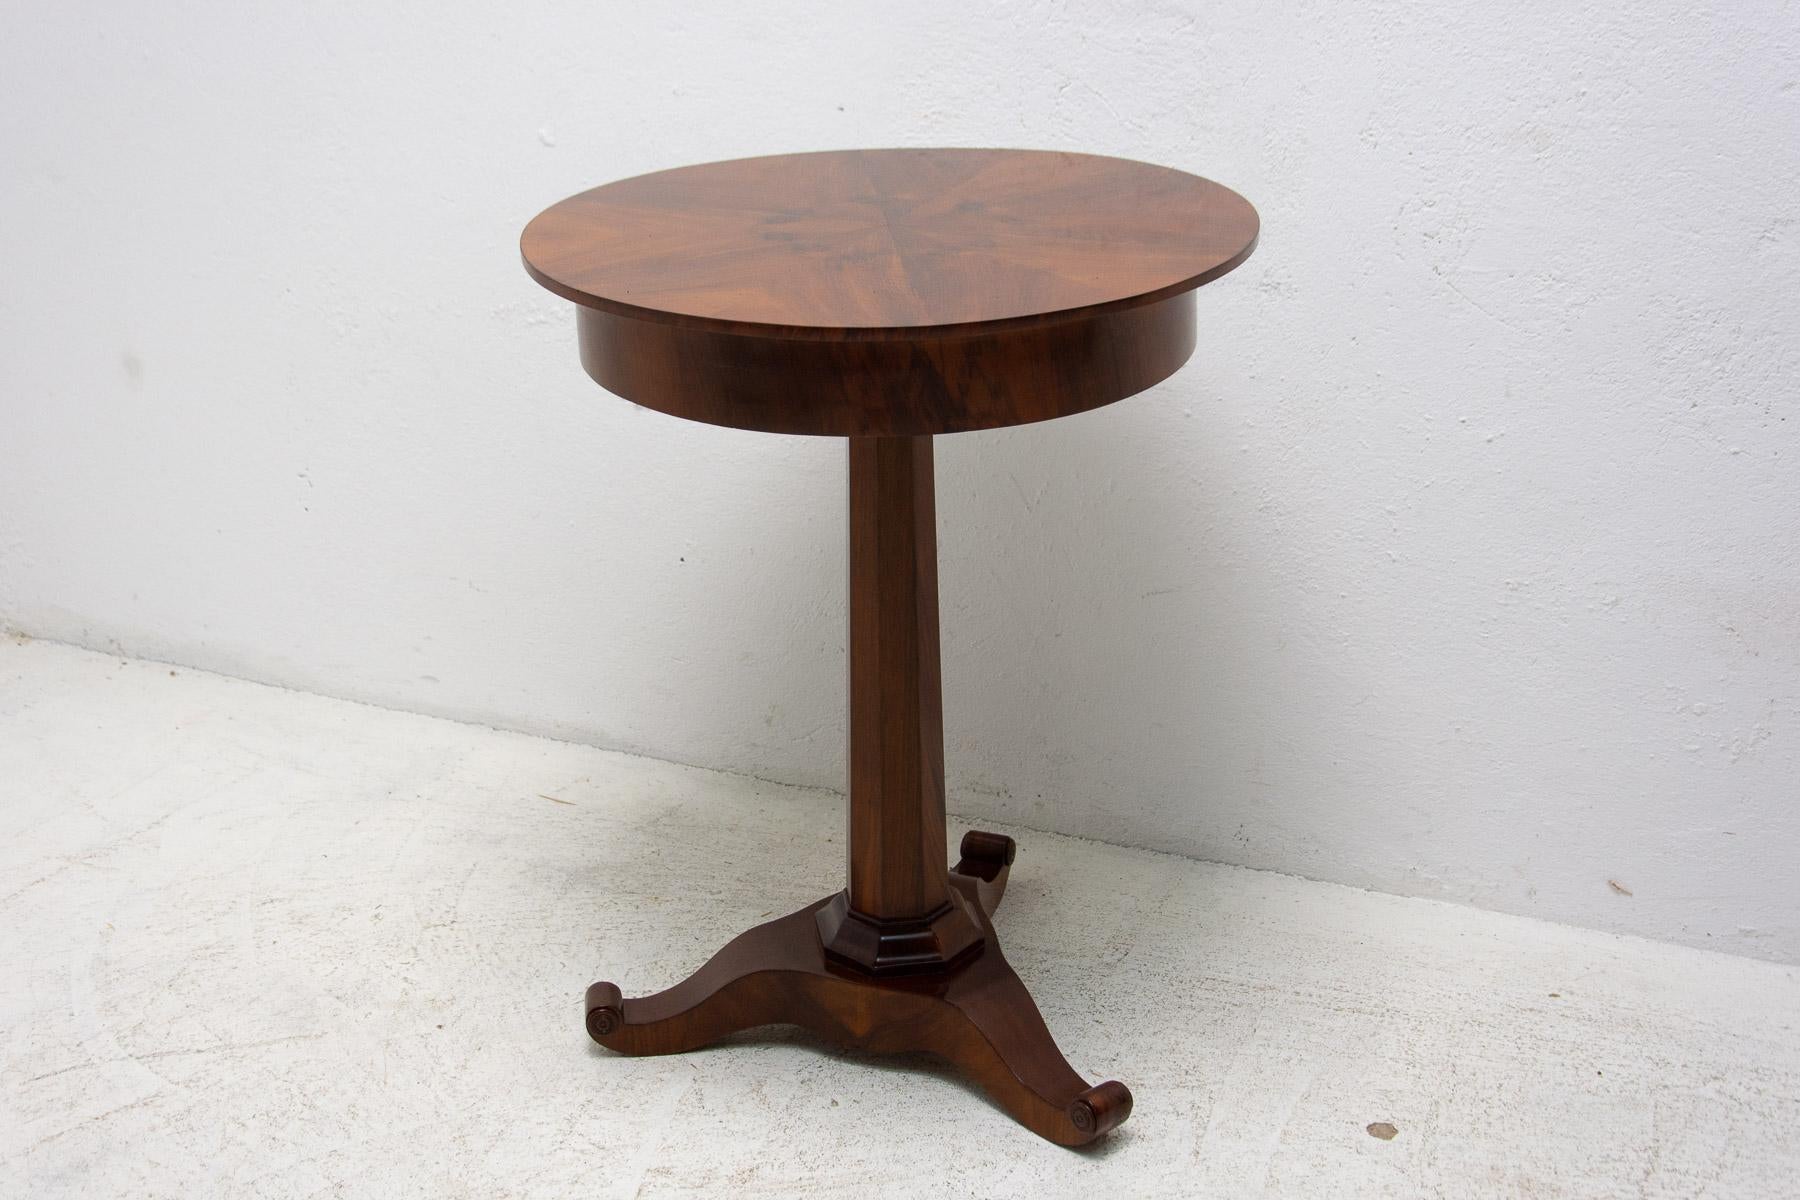 An antique, very elegant table from the Biedermeier period. Made around 1830 in the territory of the former Austria-Hungary Empire. Made of walnut wood. In excellent condition, completely restored.

Measures: Height: 78 cm

Lenght: 61